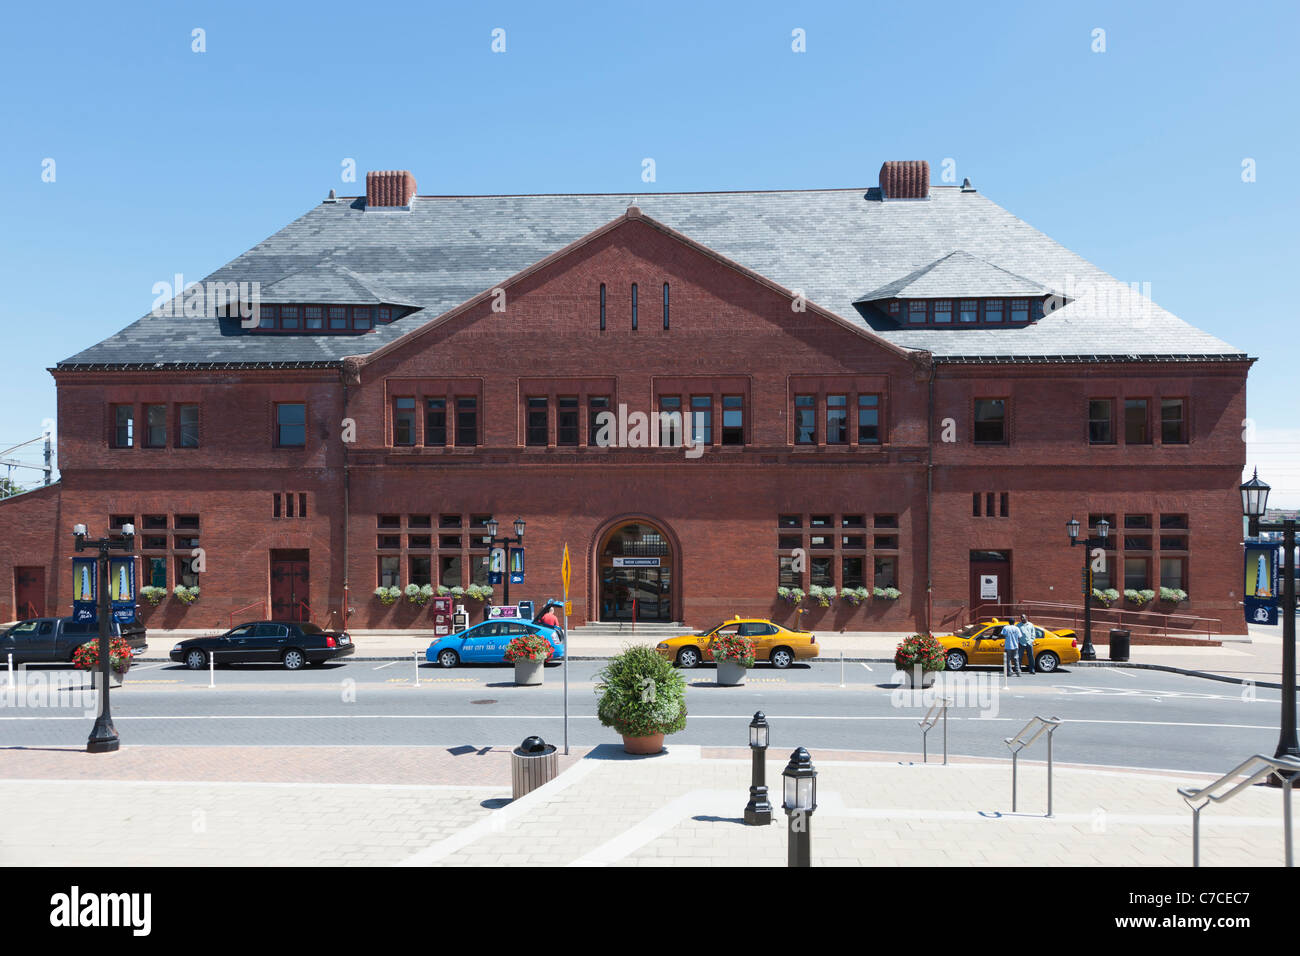 New London Union Railroad Station in New London, Connecticut. Stock Photo